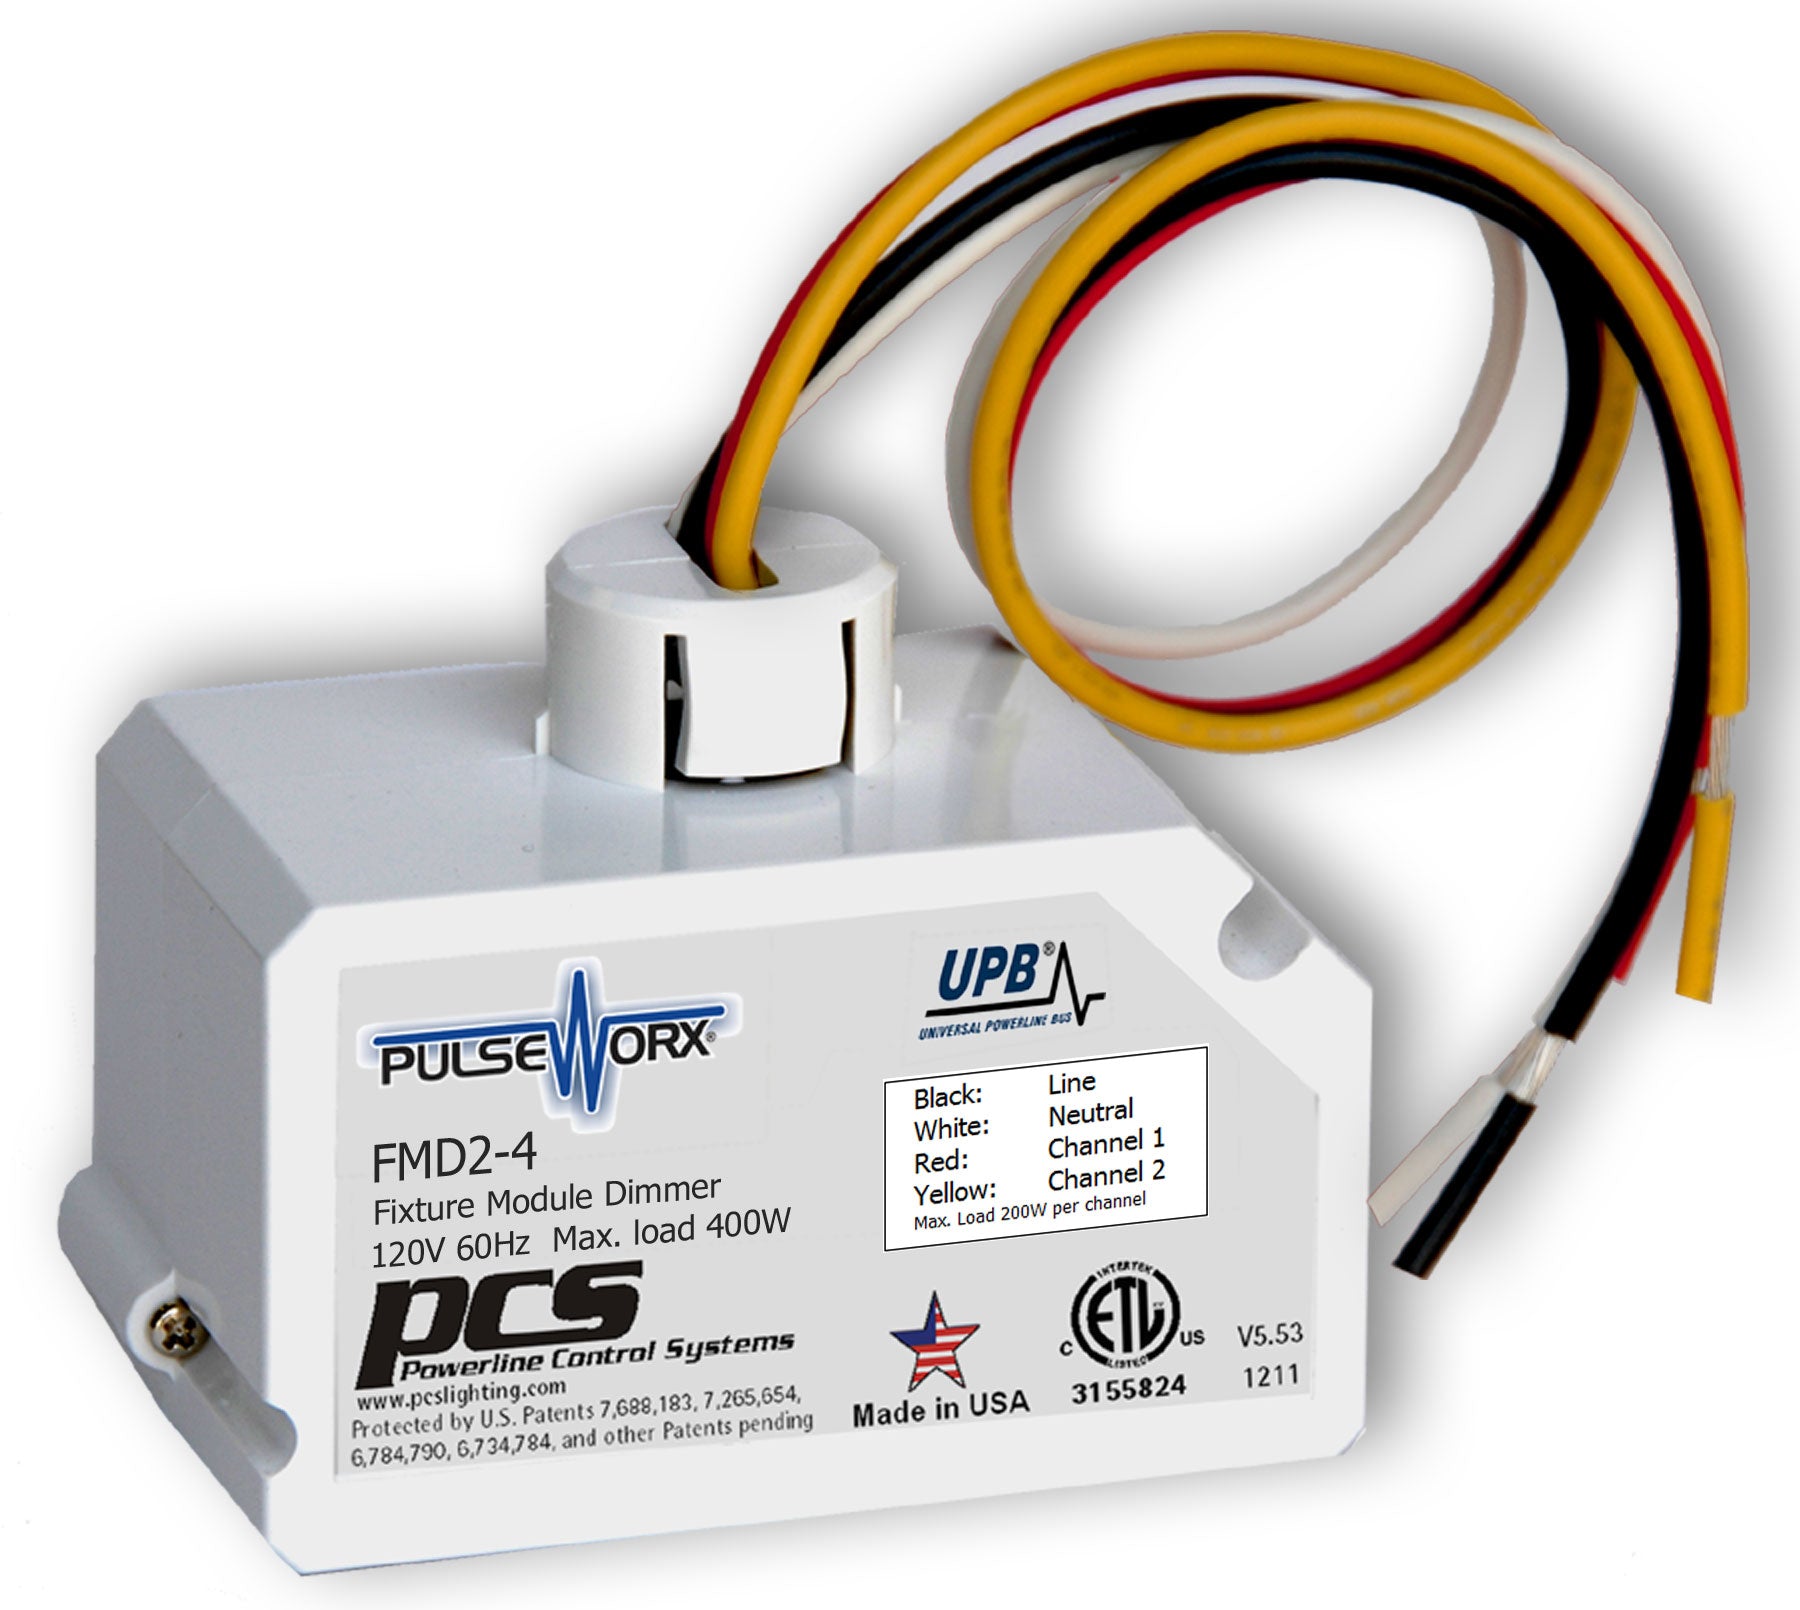 PulseWorx FMD2-4: Fixture Module - Dimming, 2 Channels, 400W Max